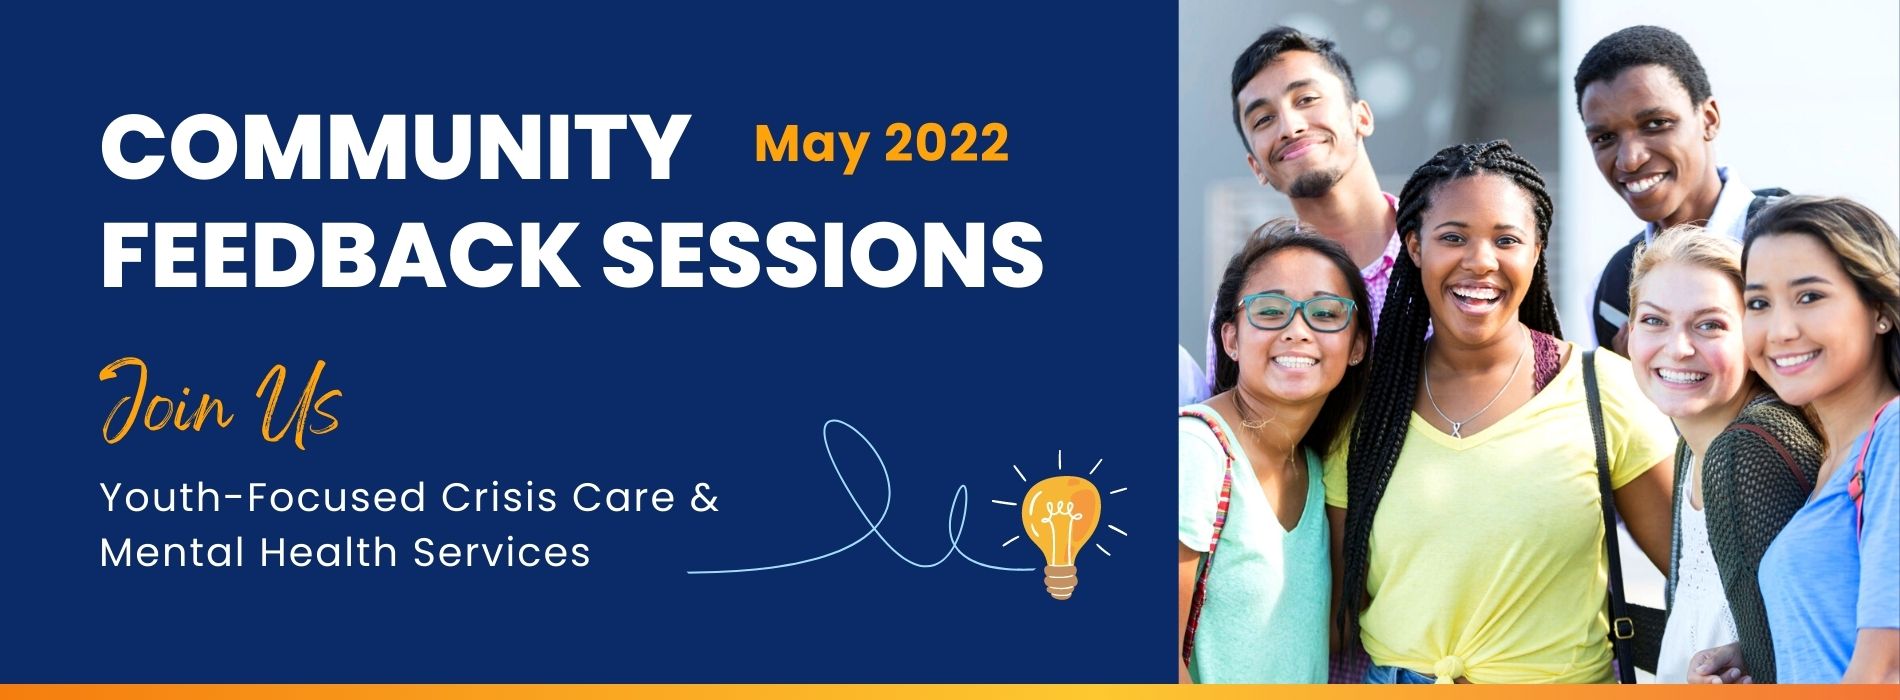 May 2022 Community Feedback Sessions. Join us to discuss youth-focused crisis care and mental health services. 